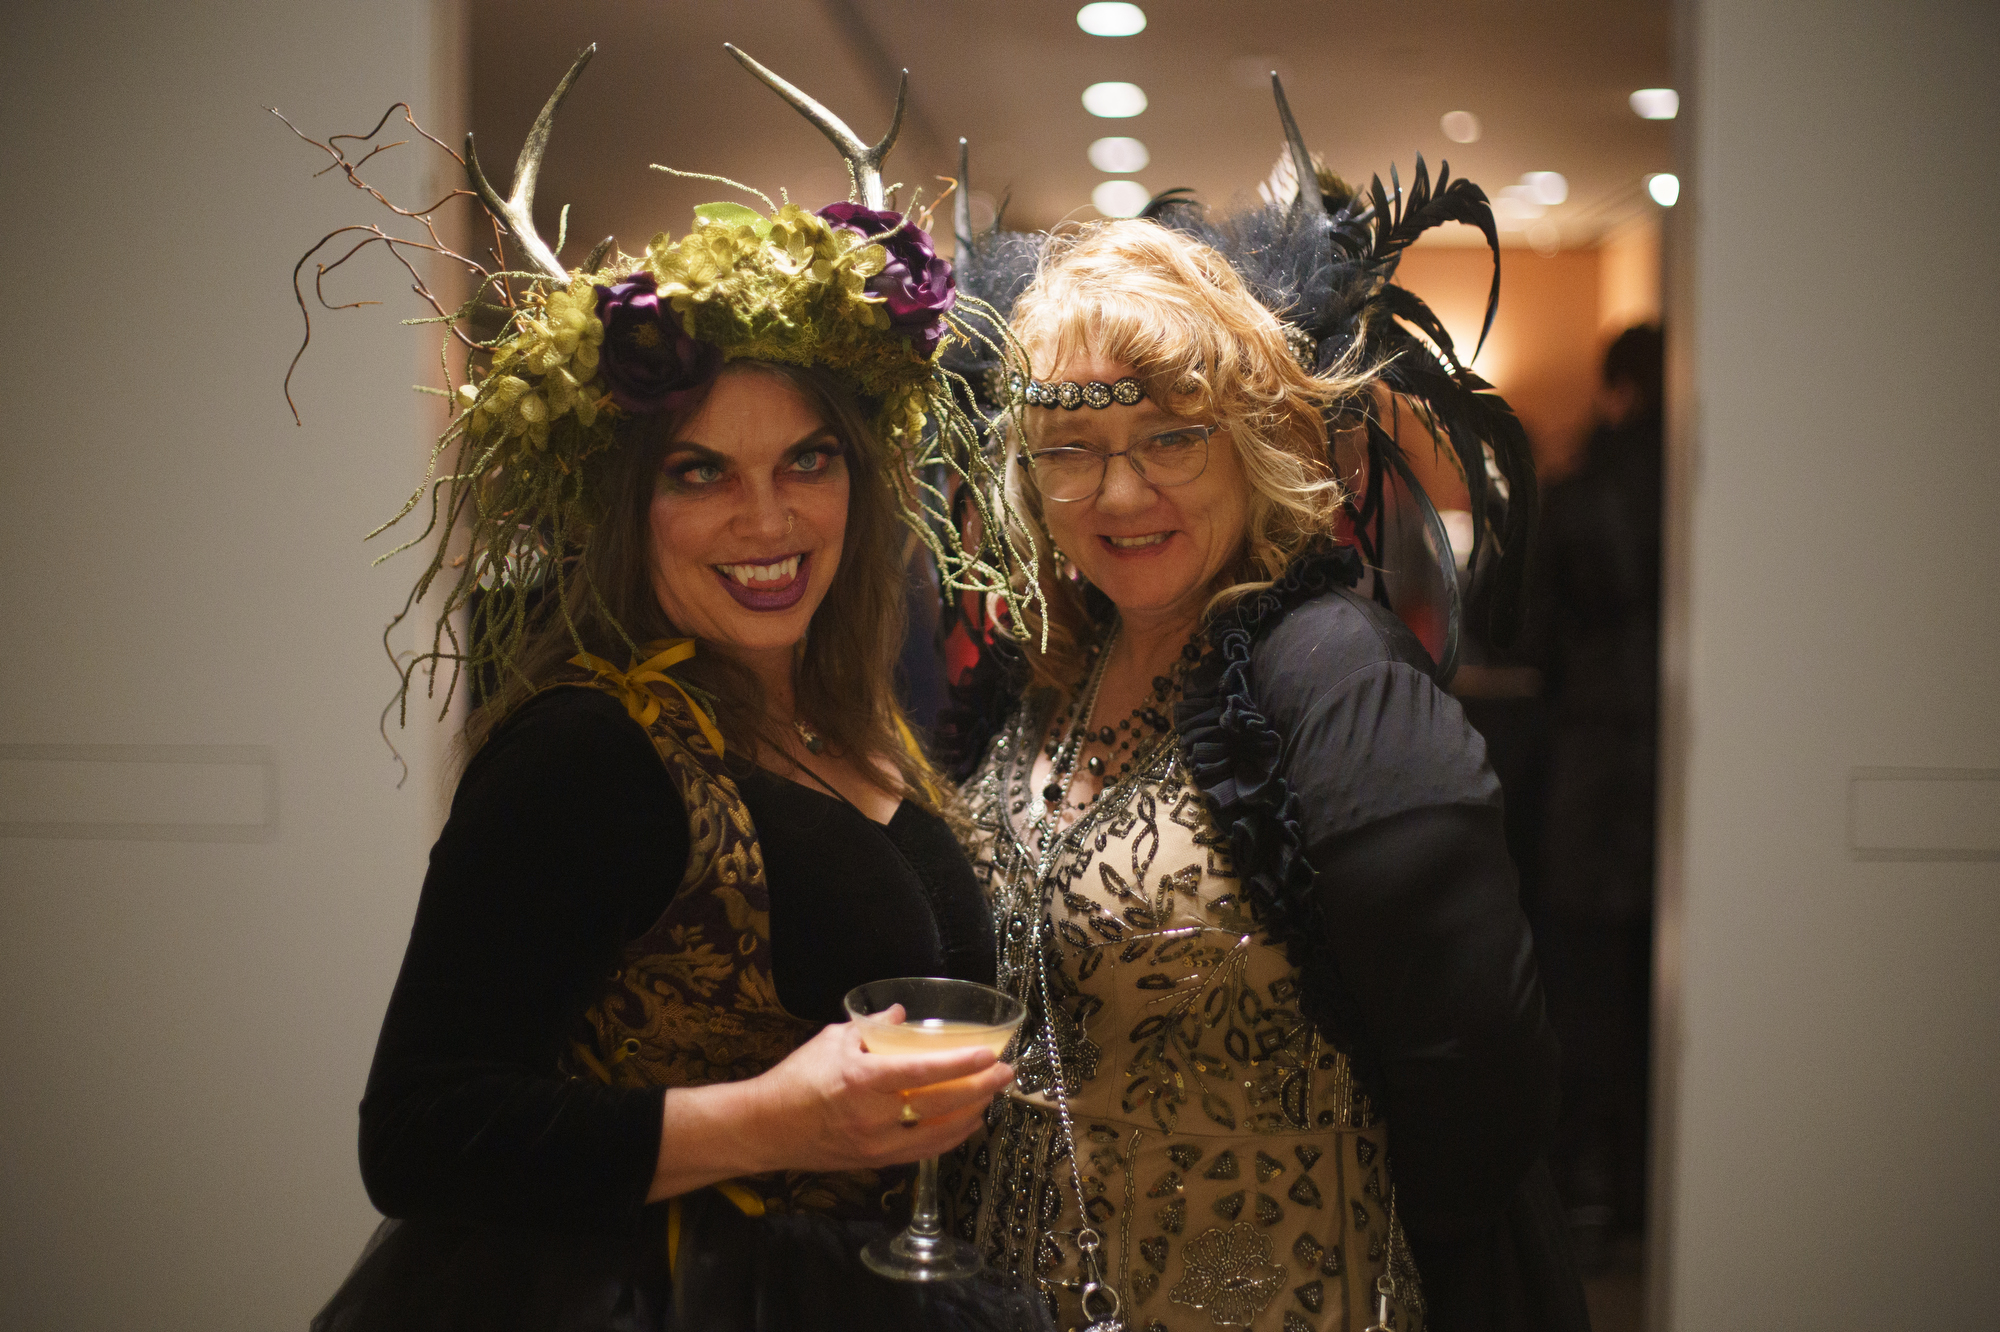 Vampire's Masquerade Ball PDX - Prepare to be amazed by the gorgeous  headpieces and fascinators designed by one of our new vendors this year  Feathers by Danusia